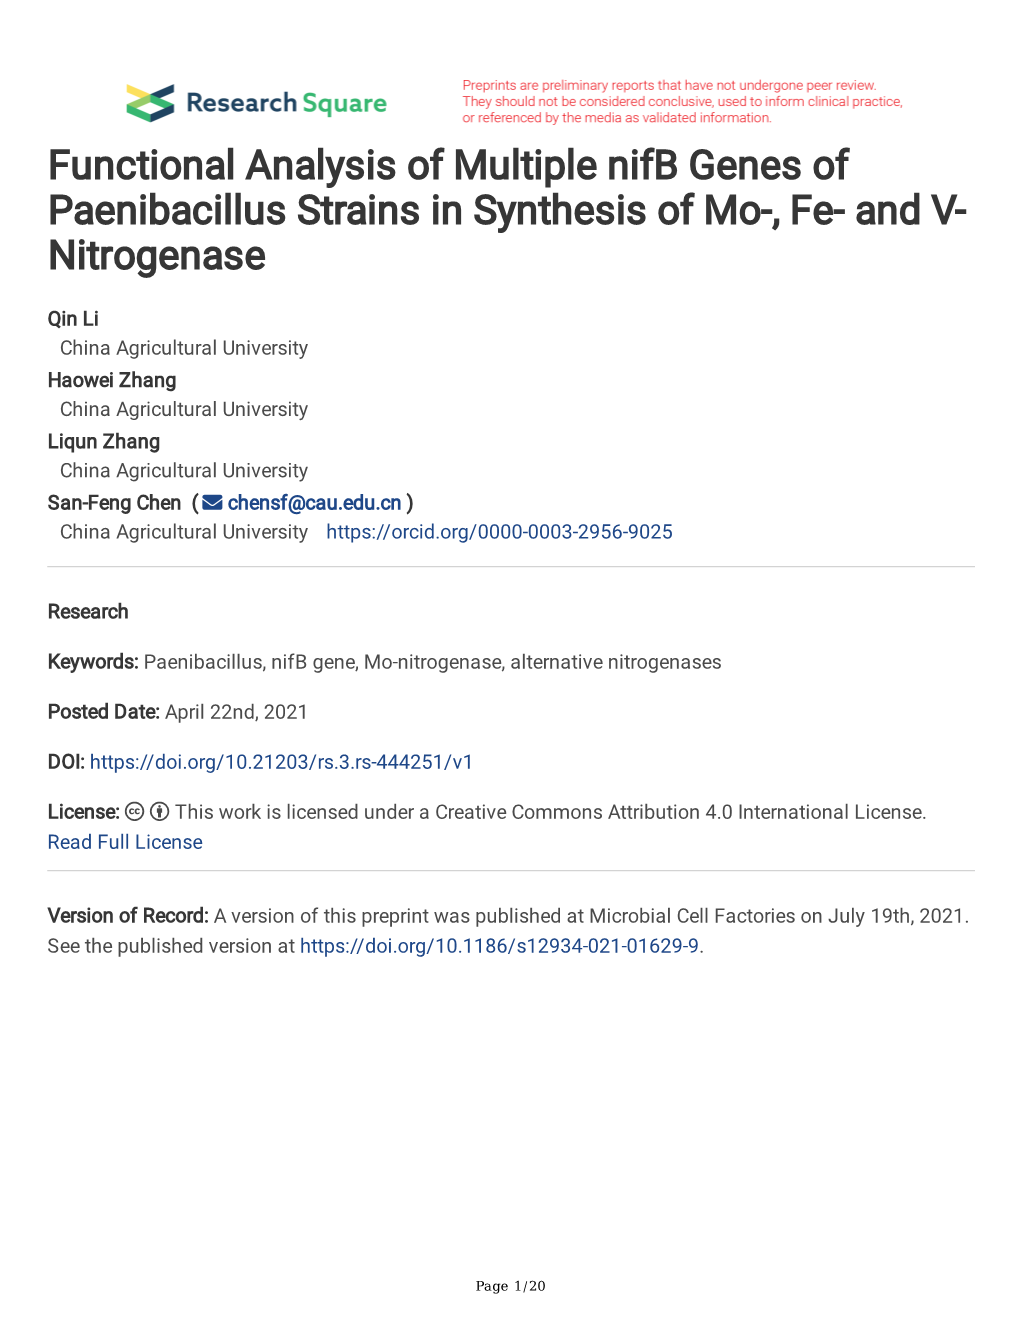 Functional Analysis of Multiple Nifb Genes of Paenibacillus Strains in Synthesis of Mo-, Fe- and V- Nitrogenase